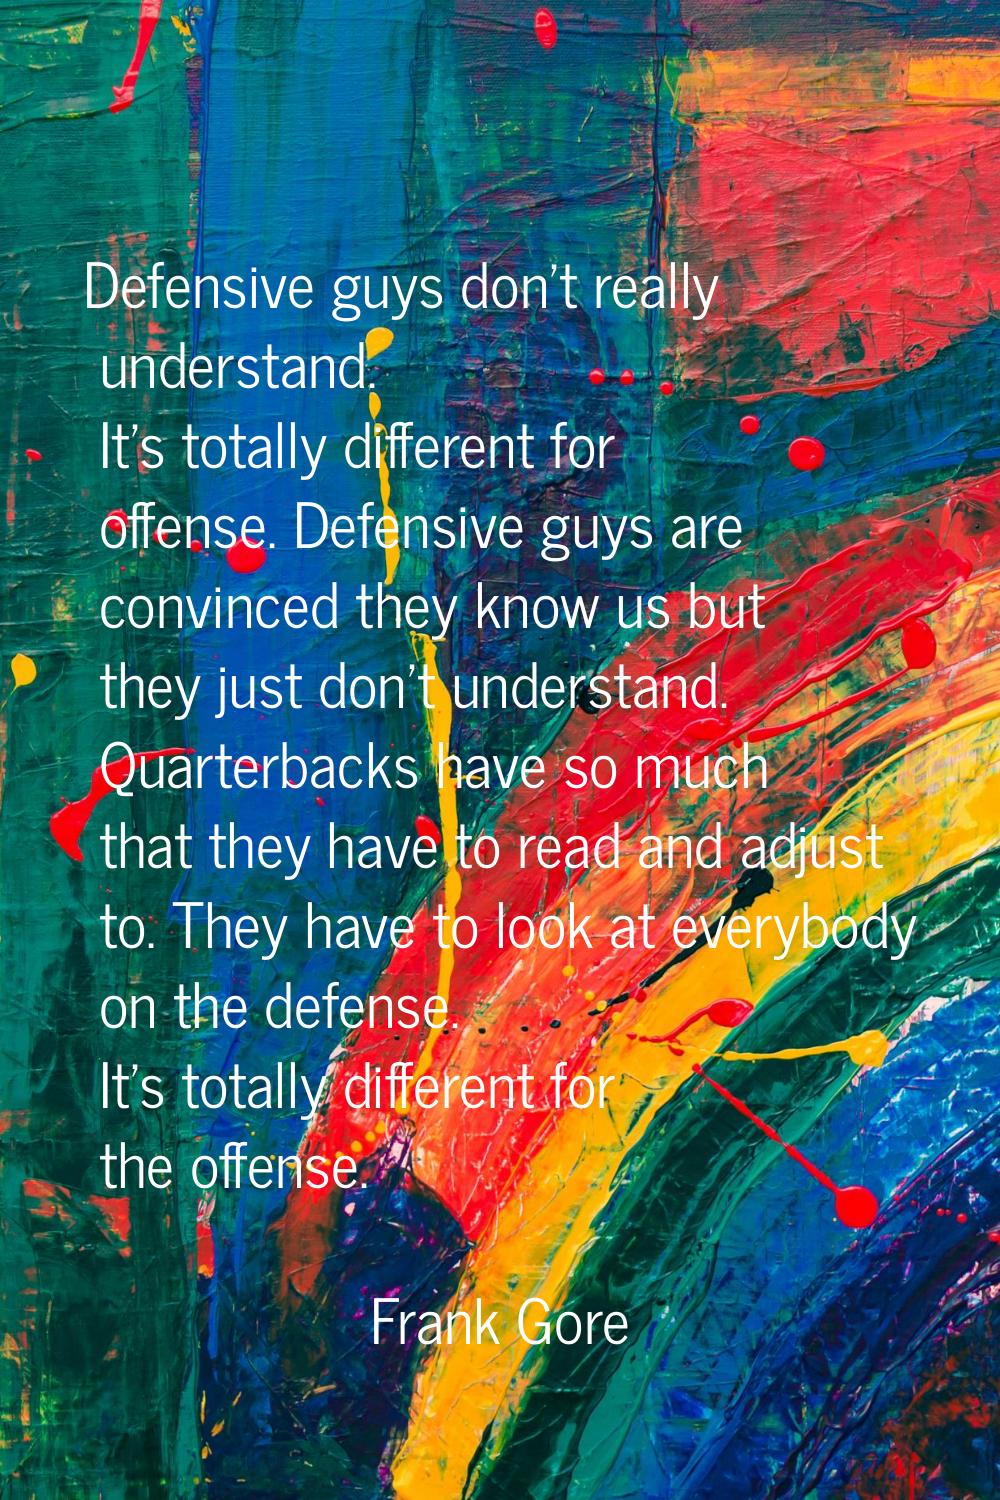 Defensive guys don't really understand. It's totally different for offense. Defensive guys are conv